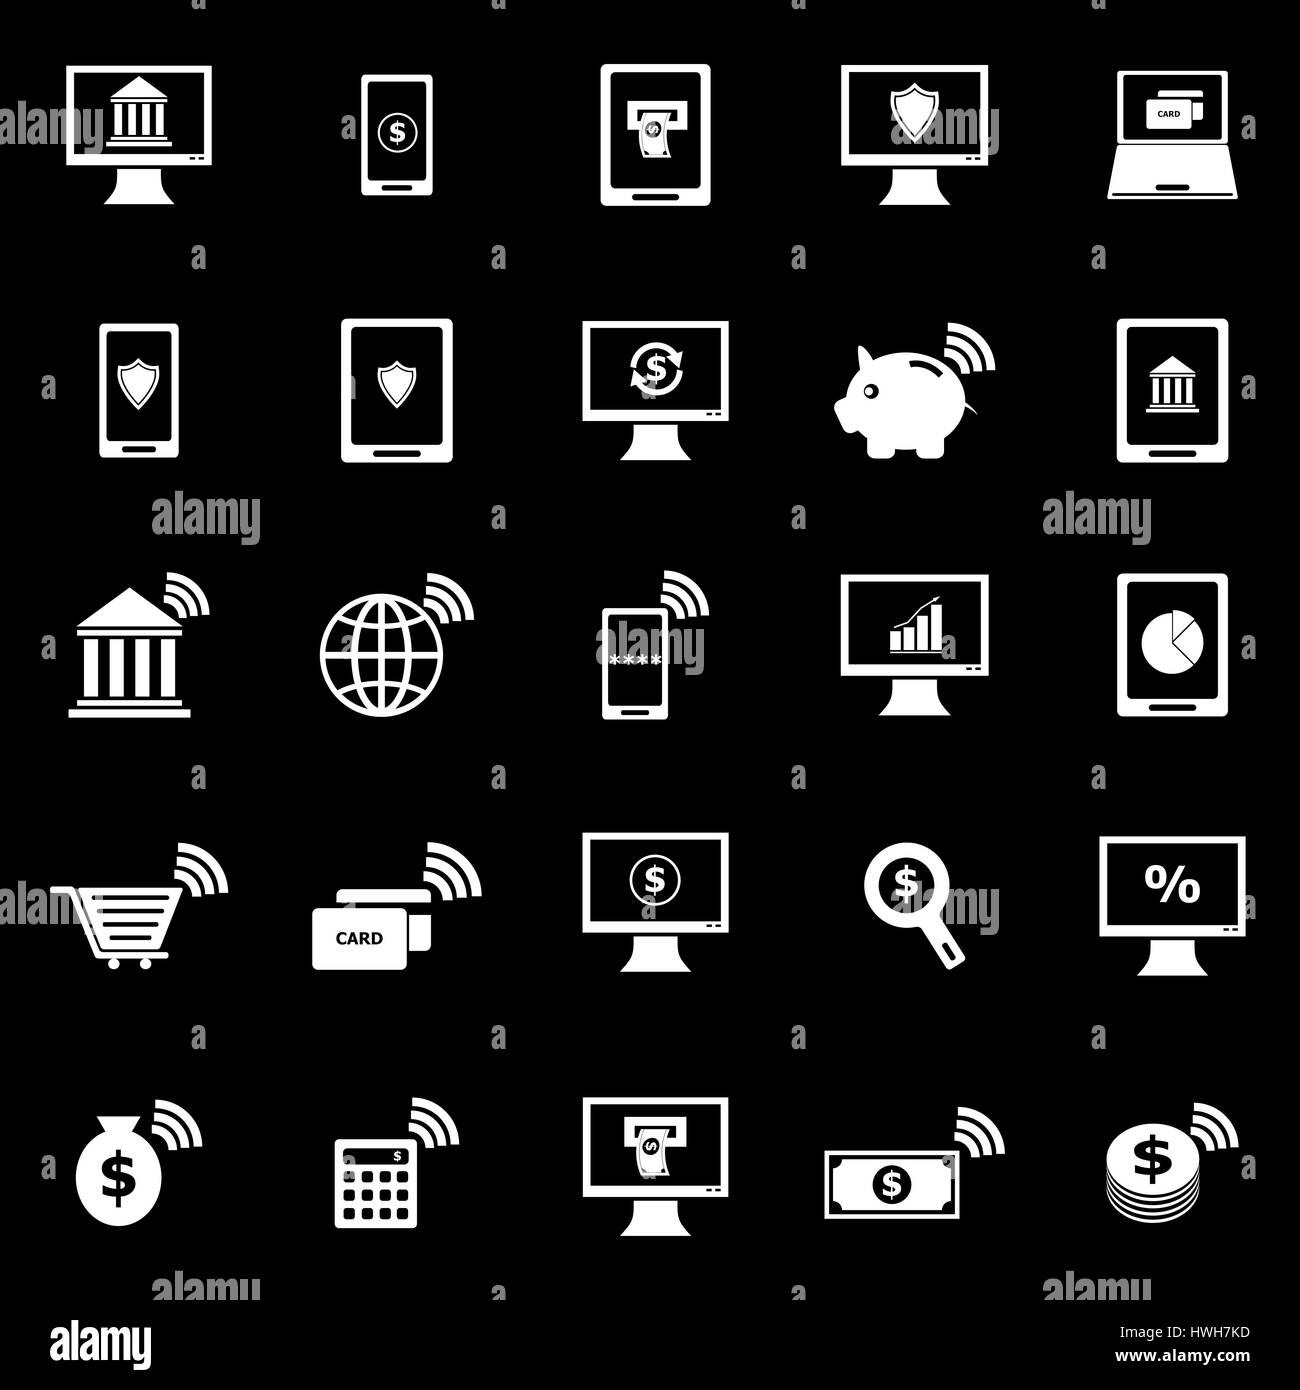 Online banking icons on black background, stock vector Stock Vector